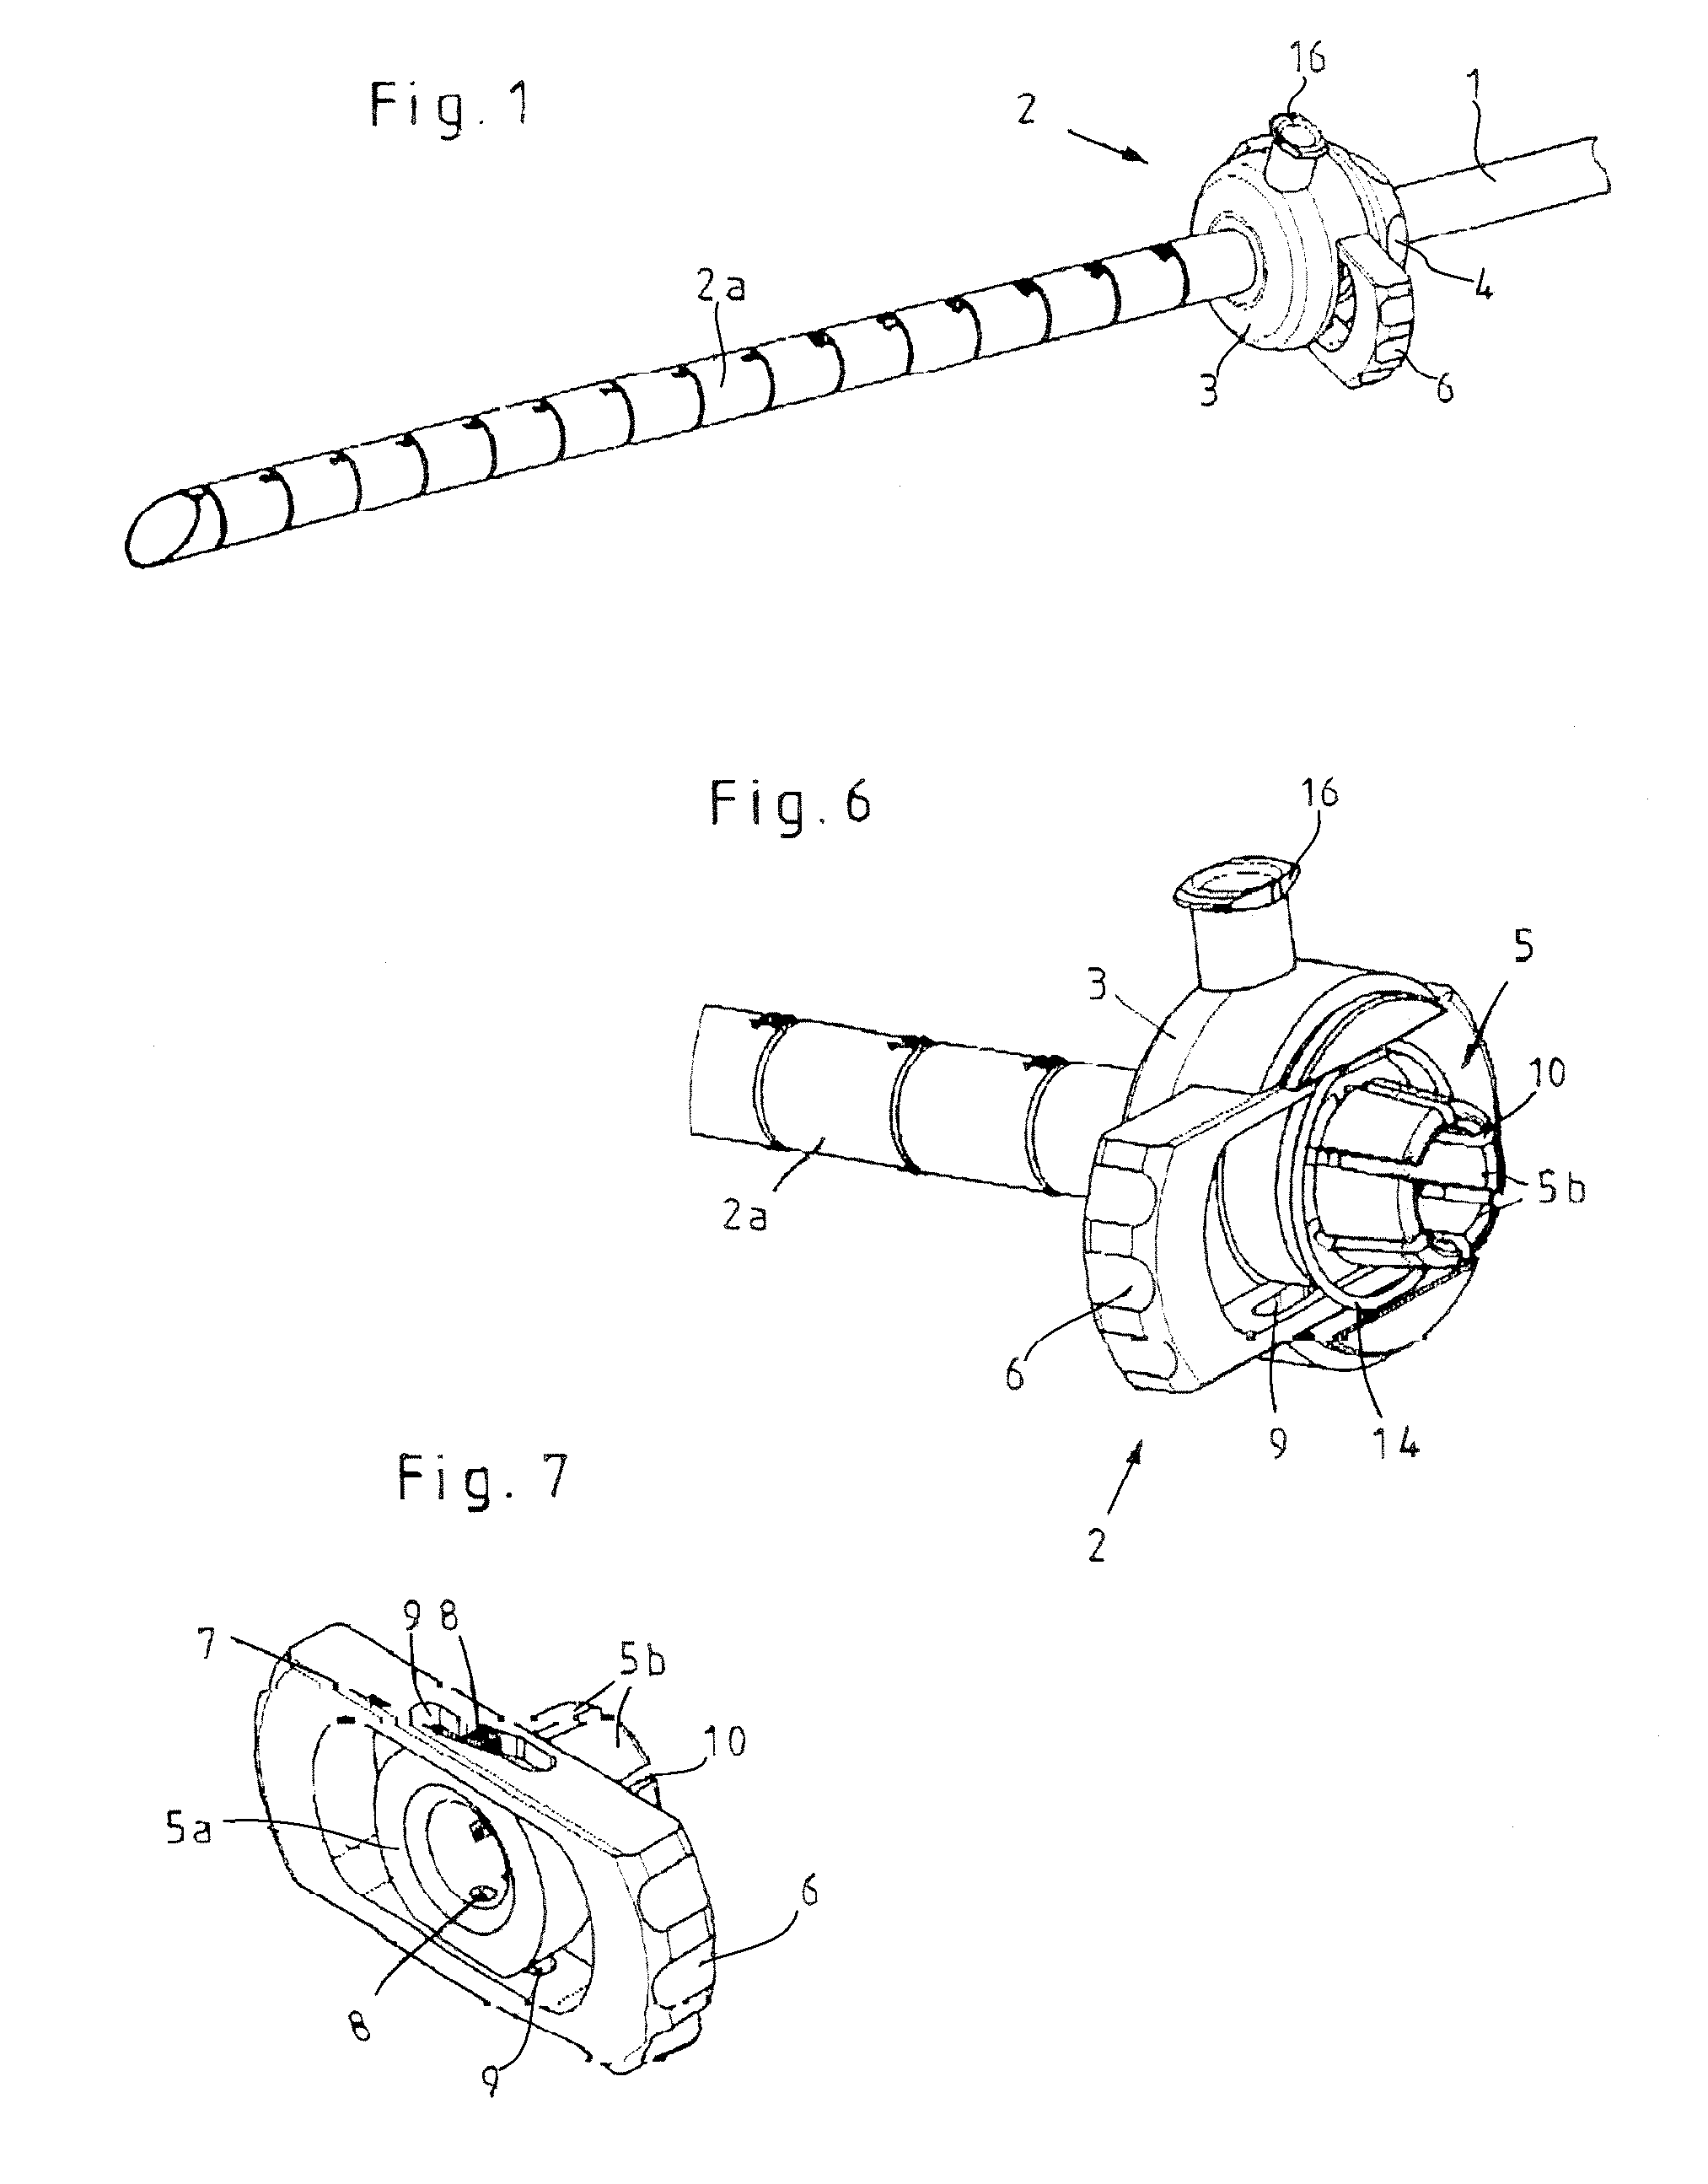 Device for affixing to cylindrical components of medical instruments